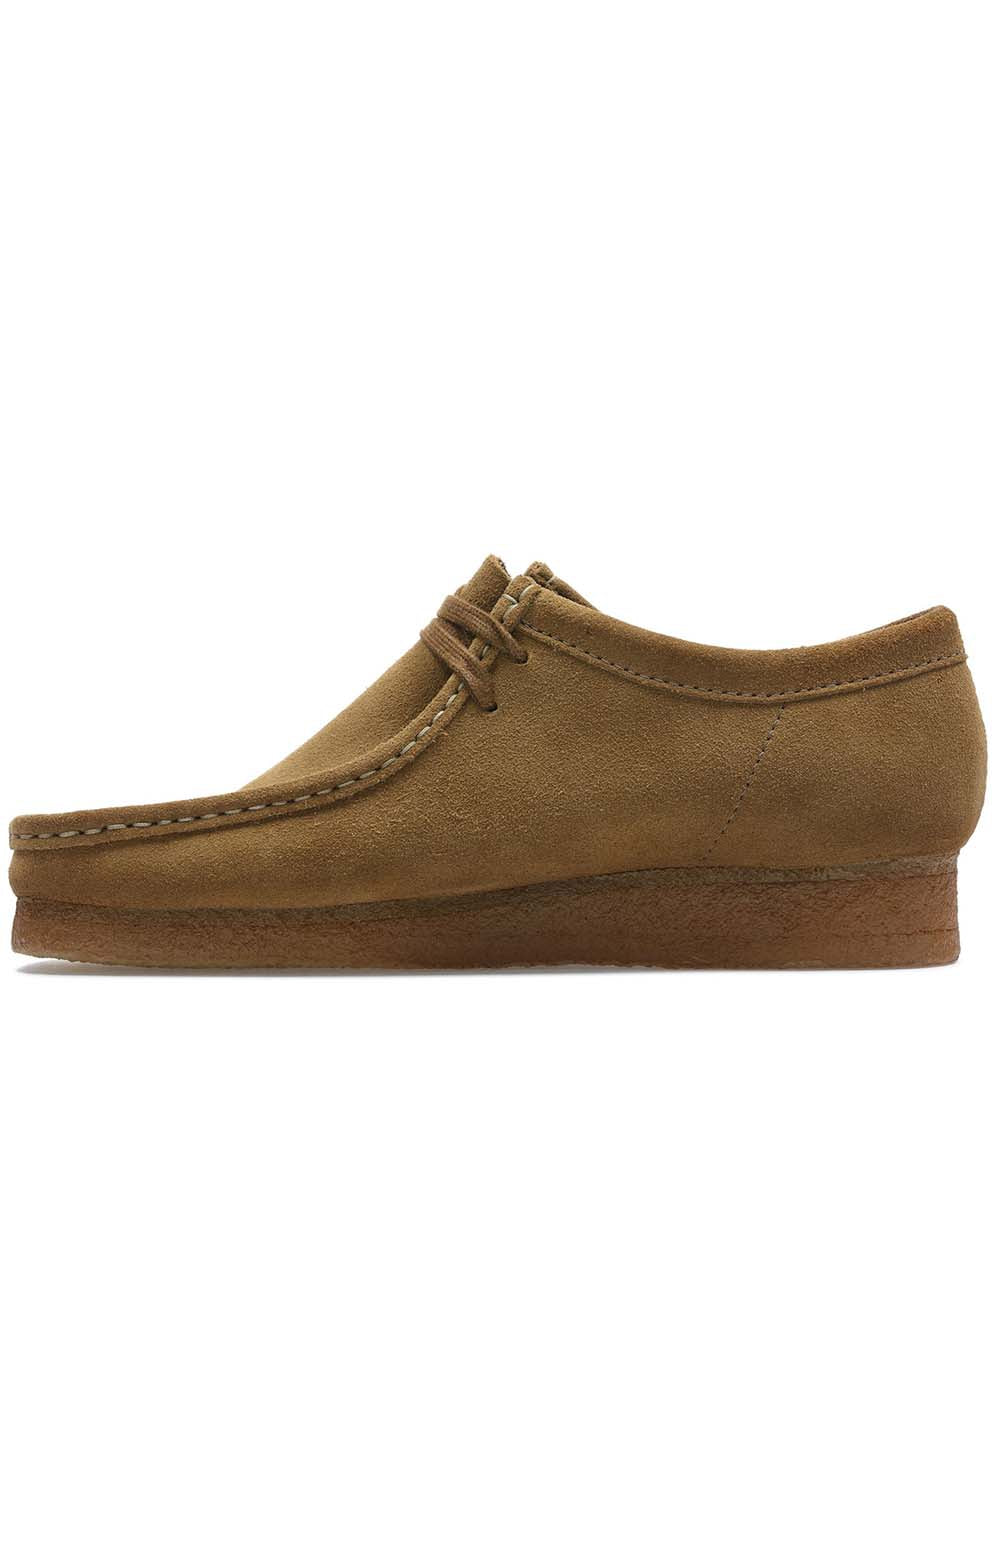 Stylish outfit featuring the Clarks Originals Wallabee Low Men's Cola Suede 26155518 shoe